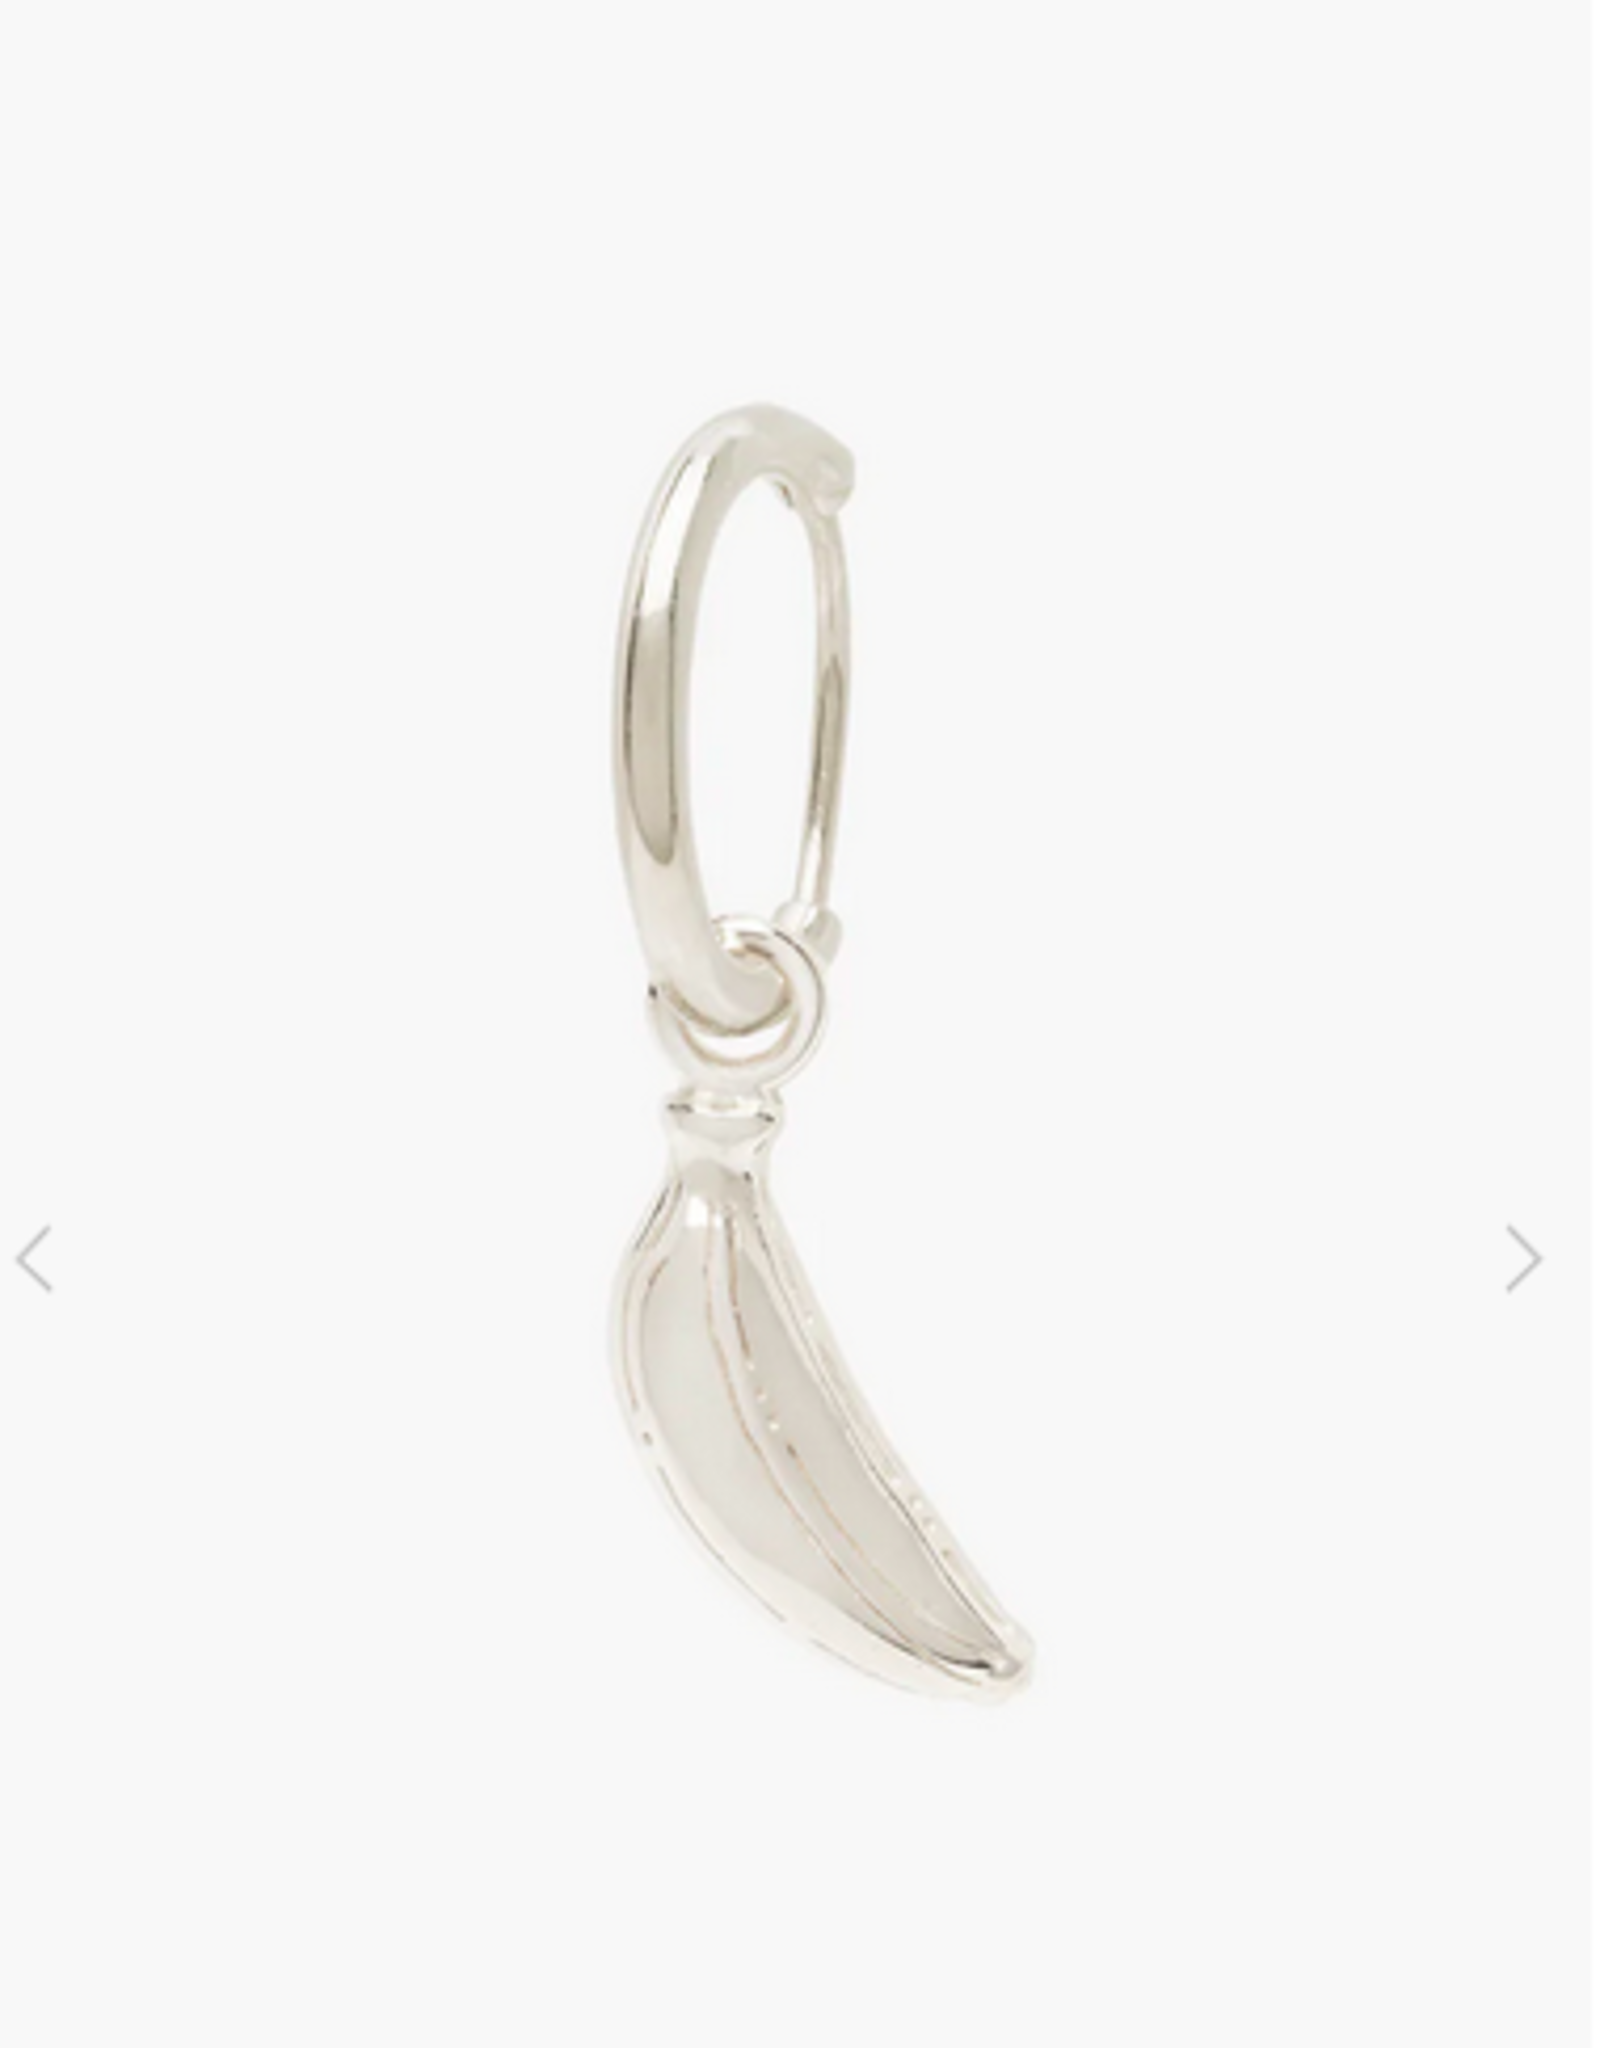 Wildthings Collectables Banana earring silver